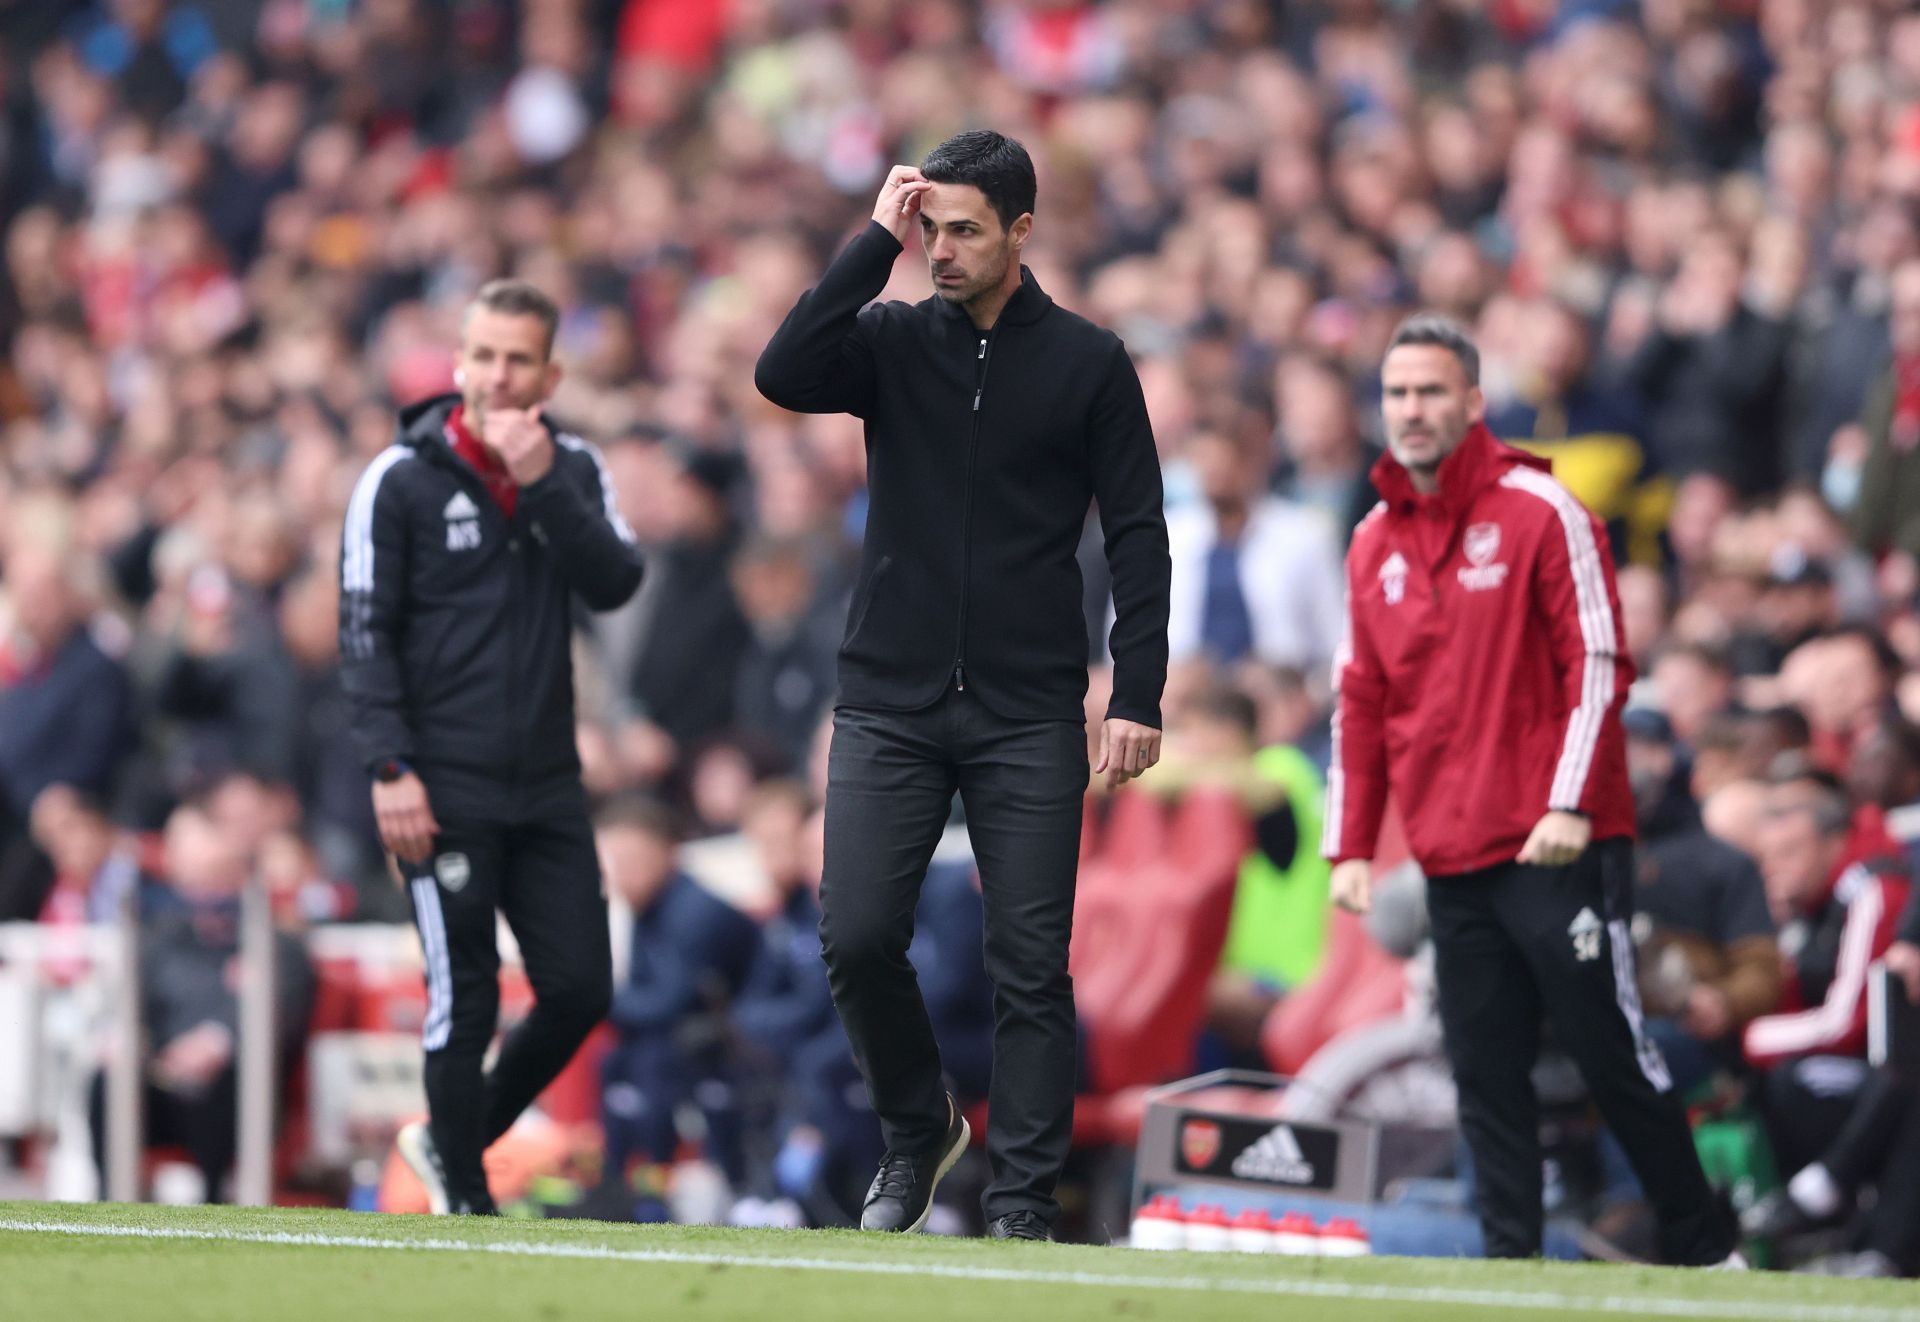 Difficult times for Mikel Arteta